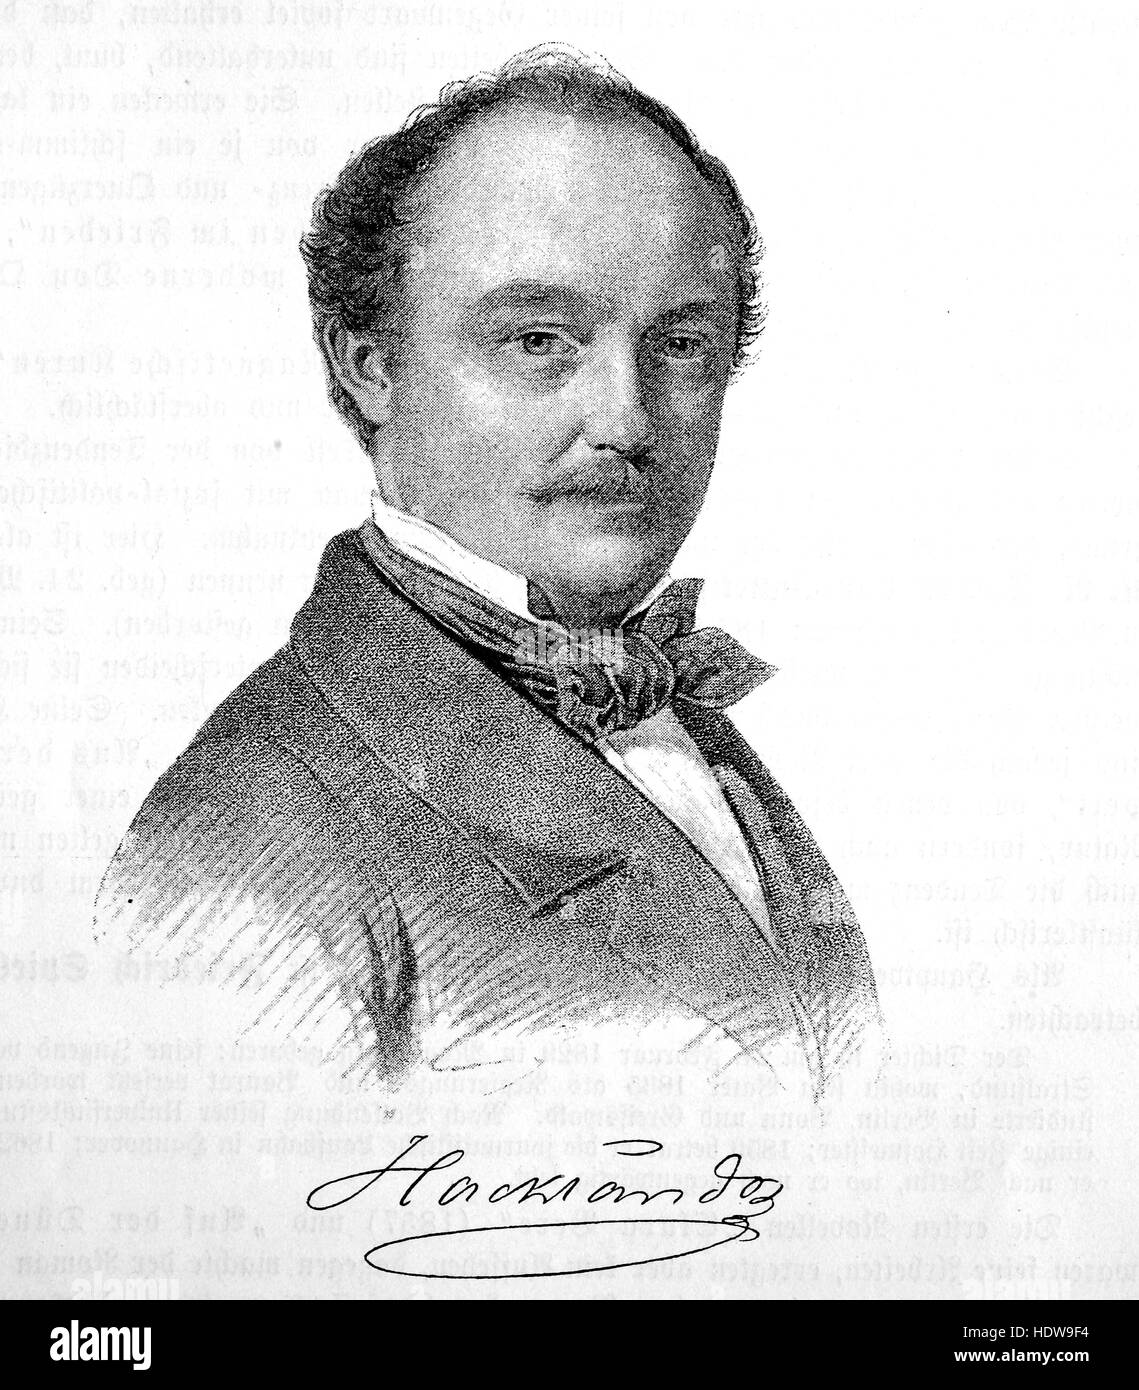 Friedrich Wilhelm Hacklaender, in later life von Hacklaender, 1816-1877, German author, woodcut from the year 1880 Stock Photo